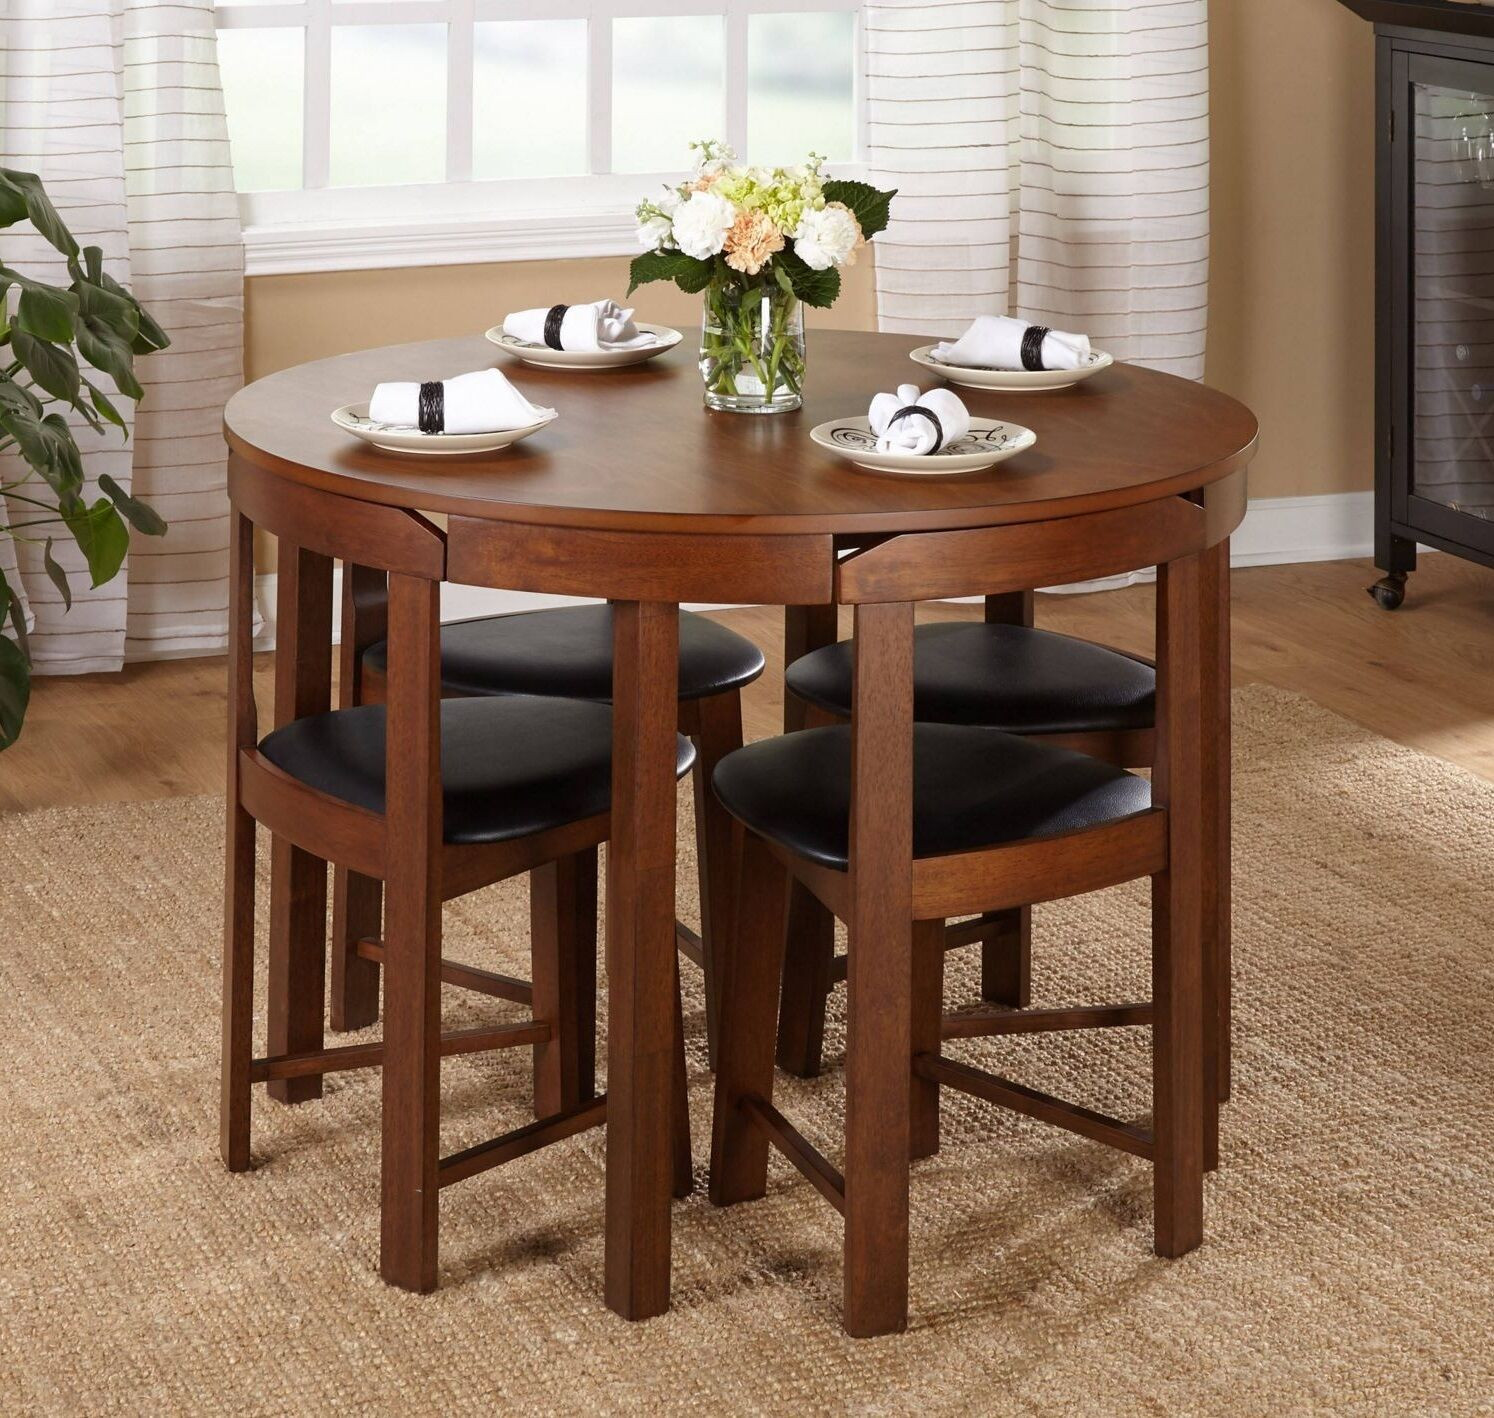 Small Kitchen Tables With Stools
 Modern 5pc Dining Table Set Kitchen Dinette Chairs